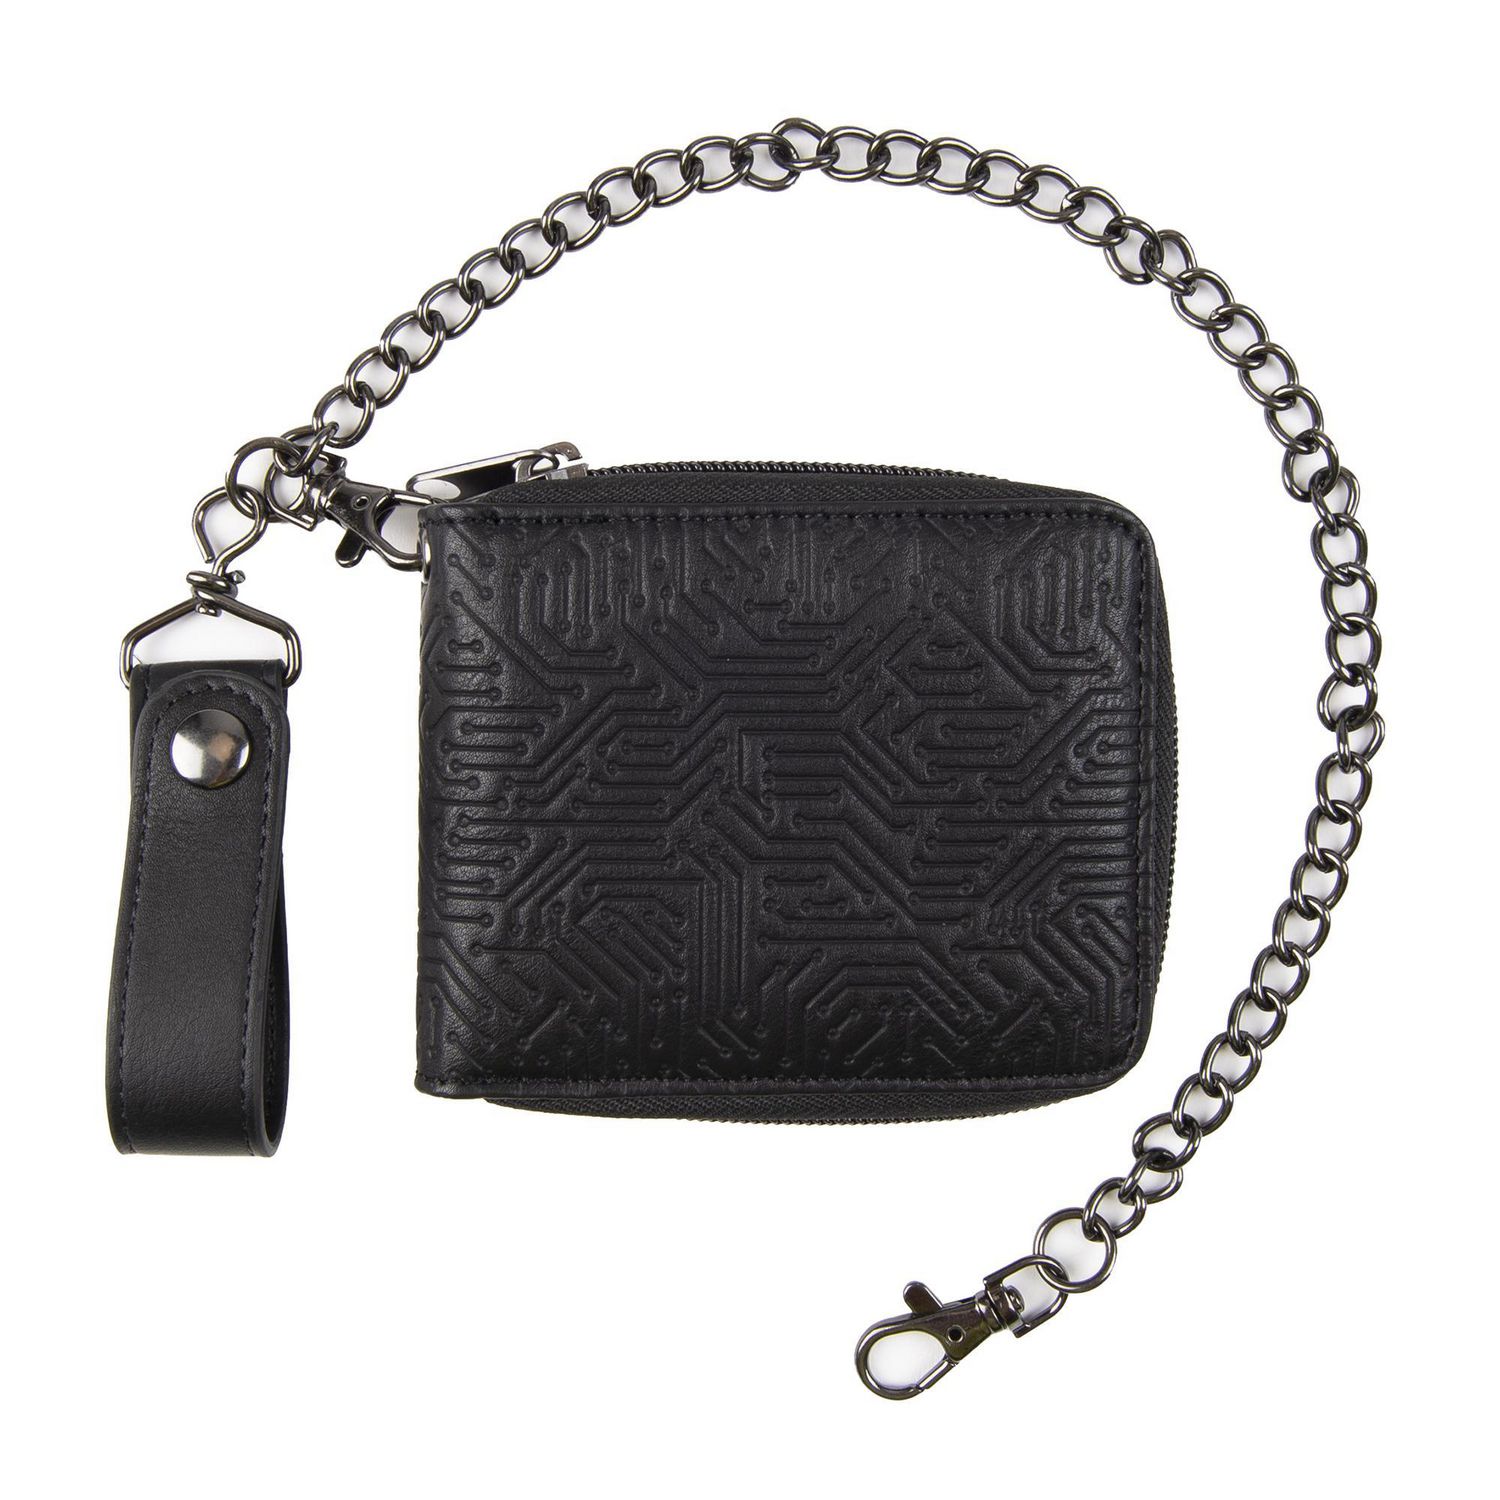 Genuine Dickies Wallet with Chain | Walmart Canada